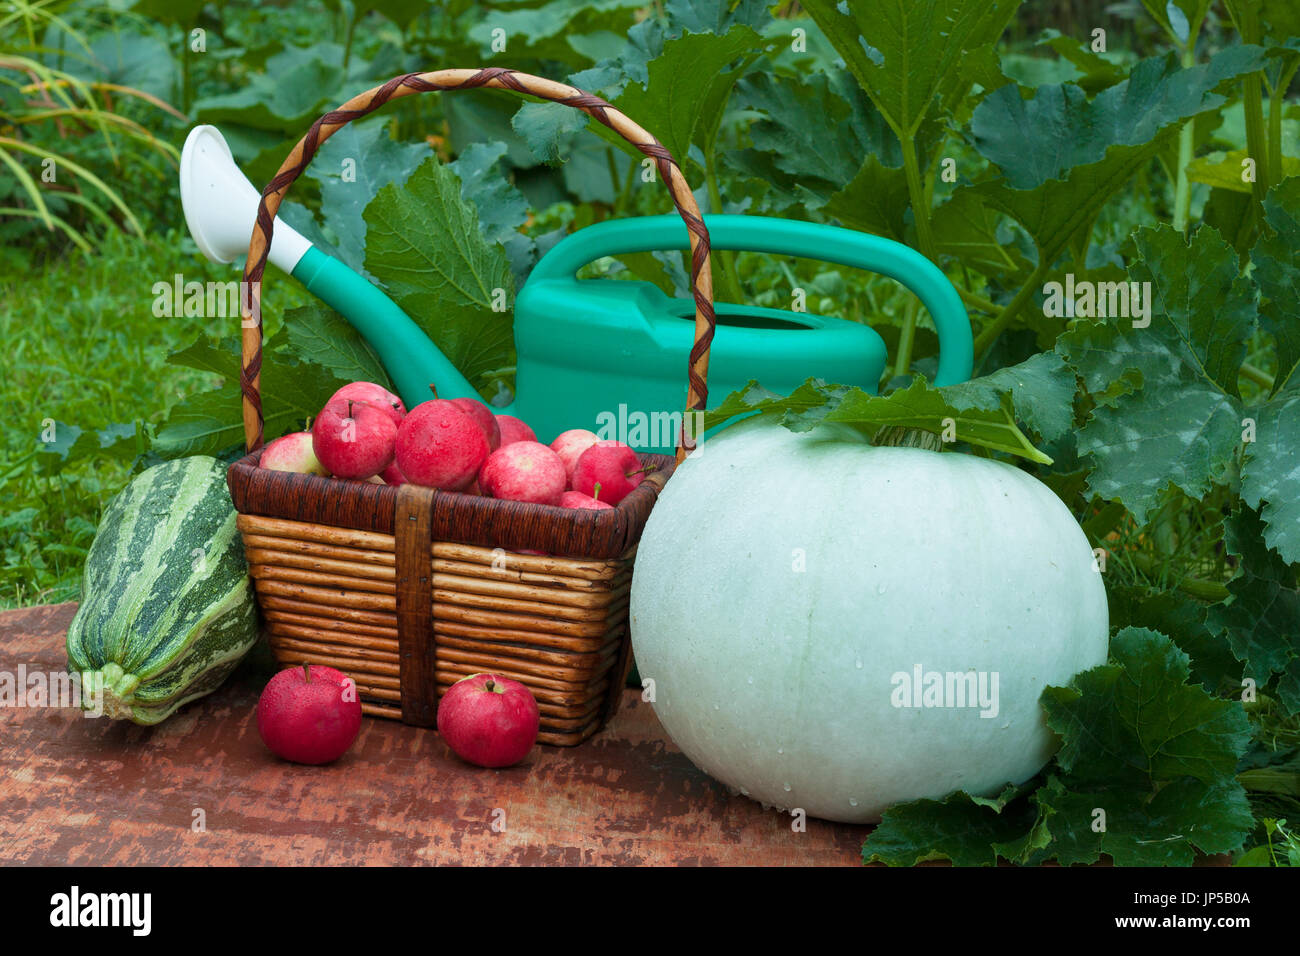 Fresh Organic Vegetables (Vegetable Marrow And Pumpkin), Wicker Basket With Red Apples And Green Watering Can On Old Wooden Painted Table In Summer Ve Stock Photo